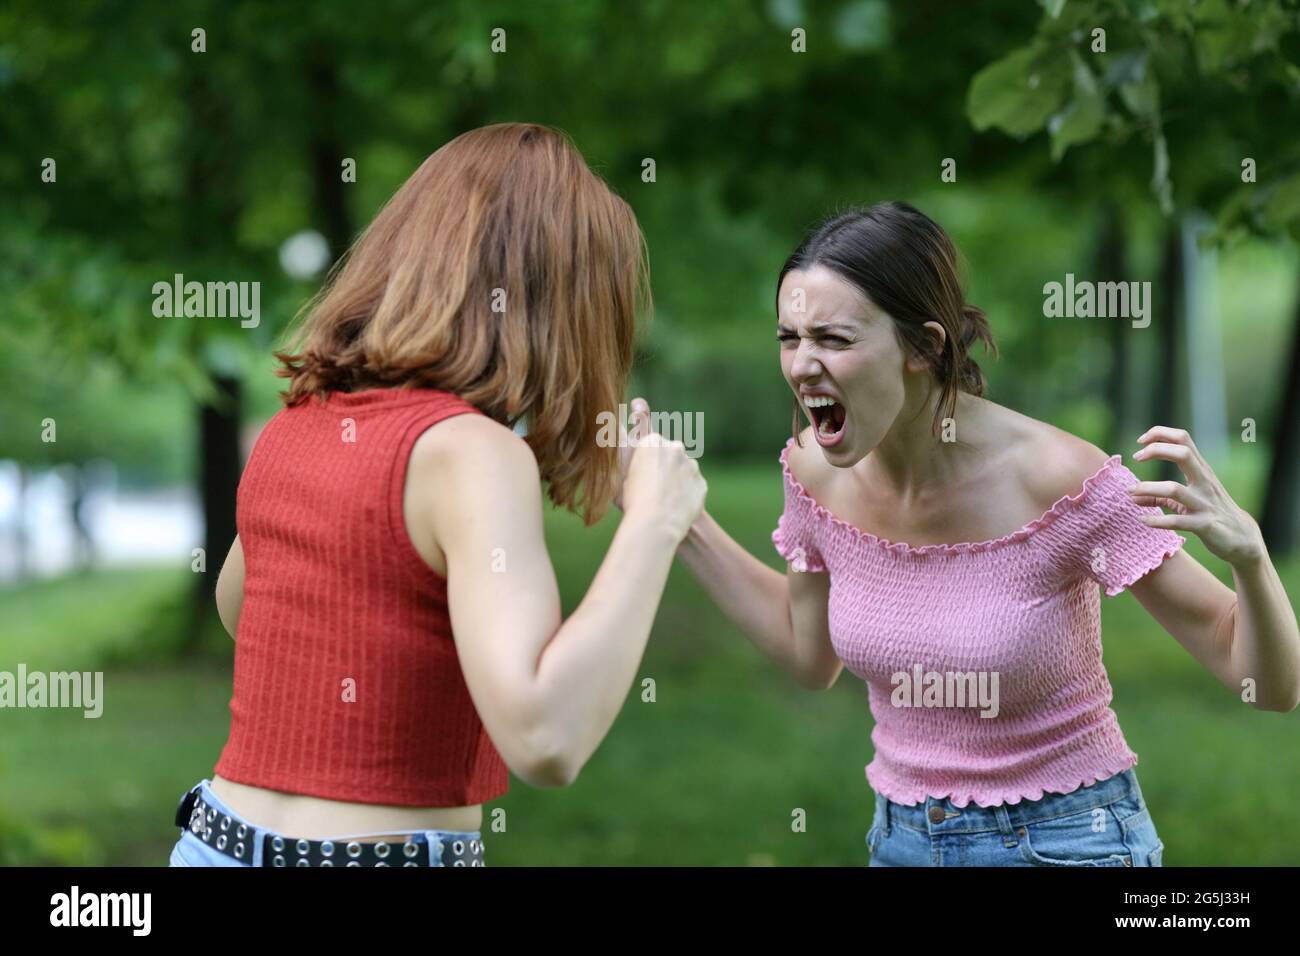 Two angry women arguing aggressively in a park Stock Photo